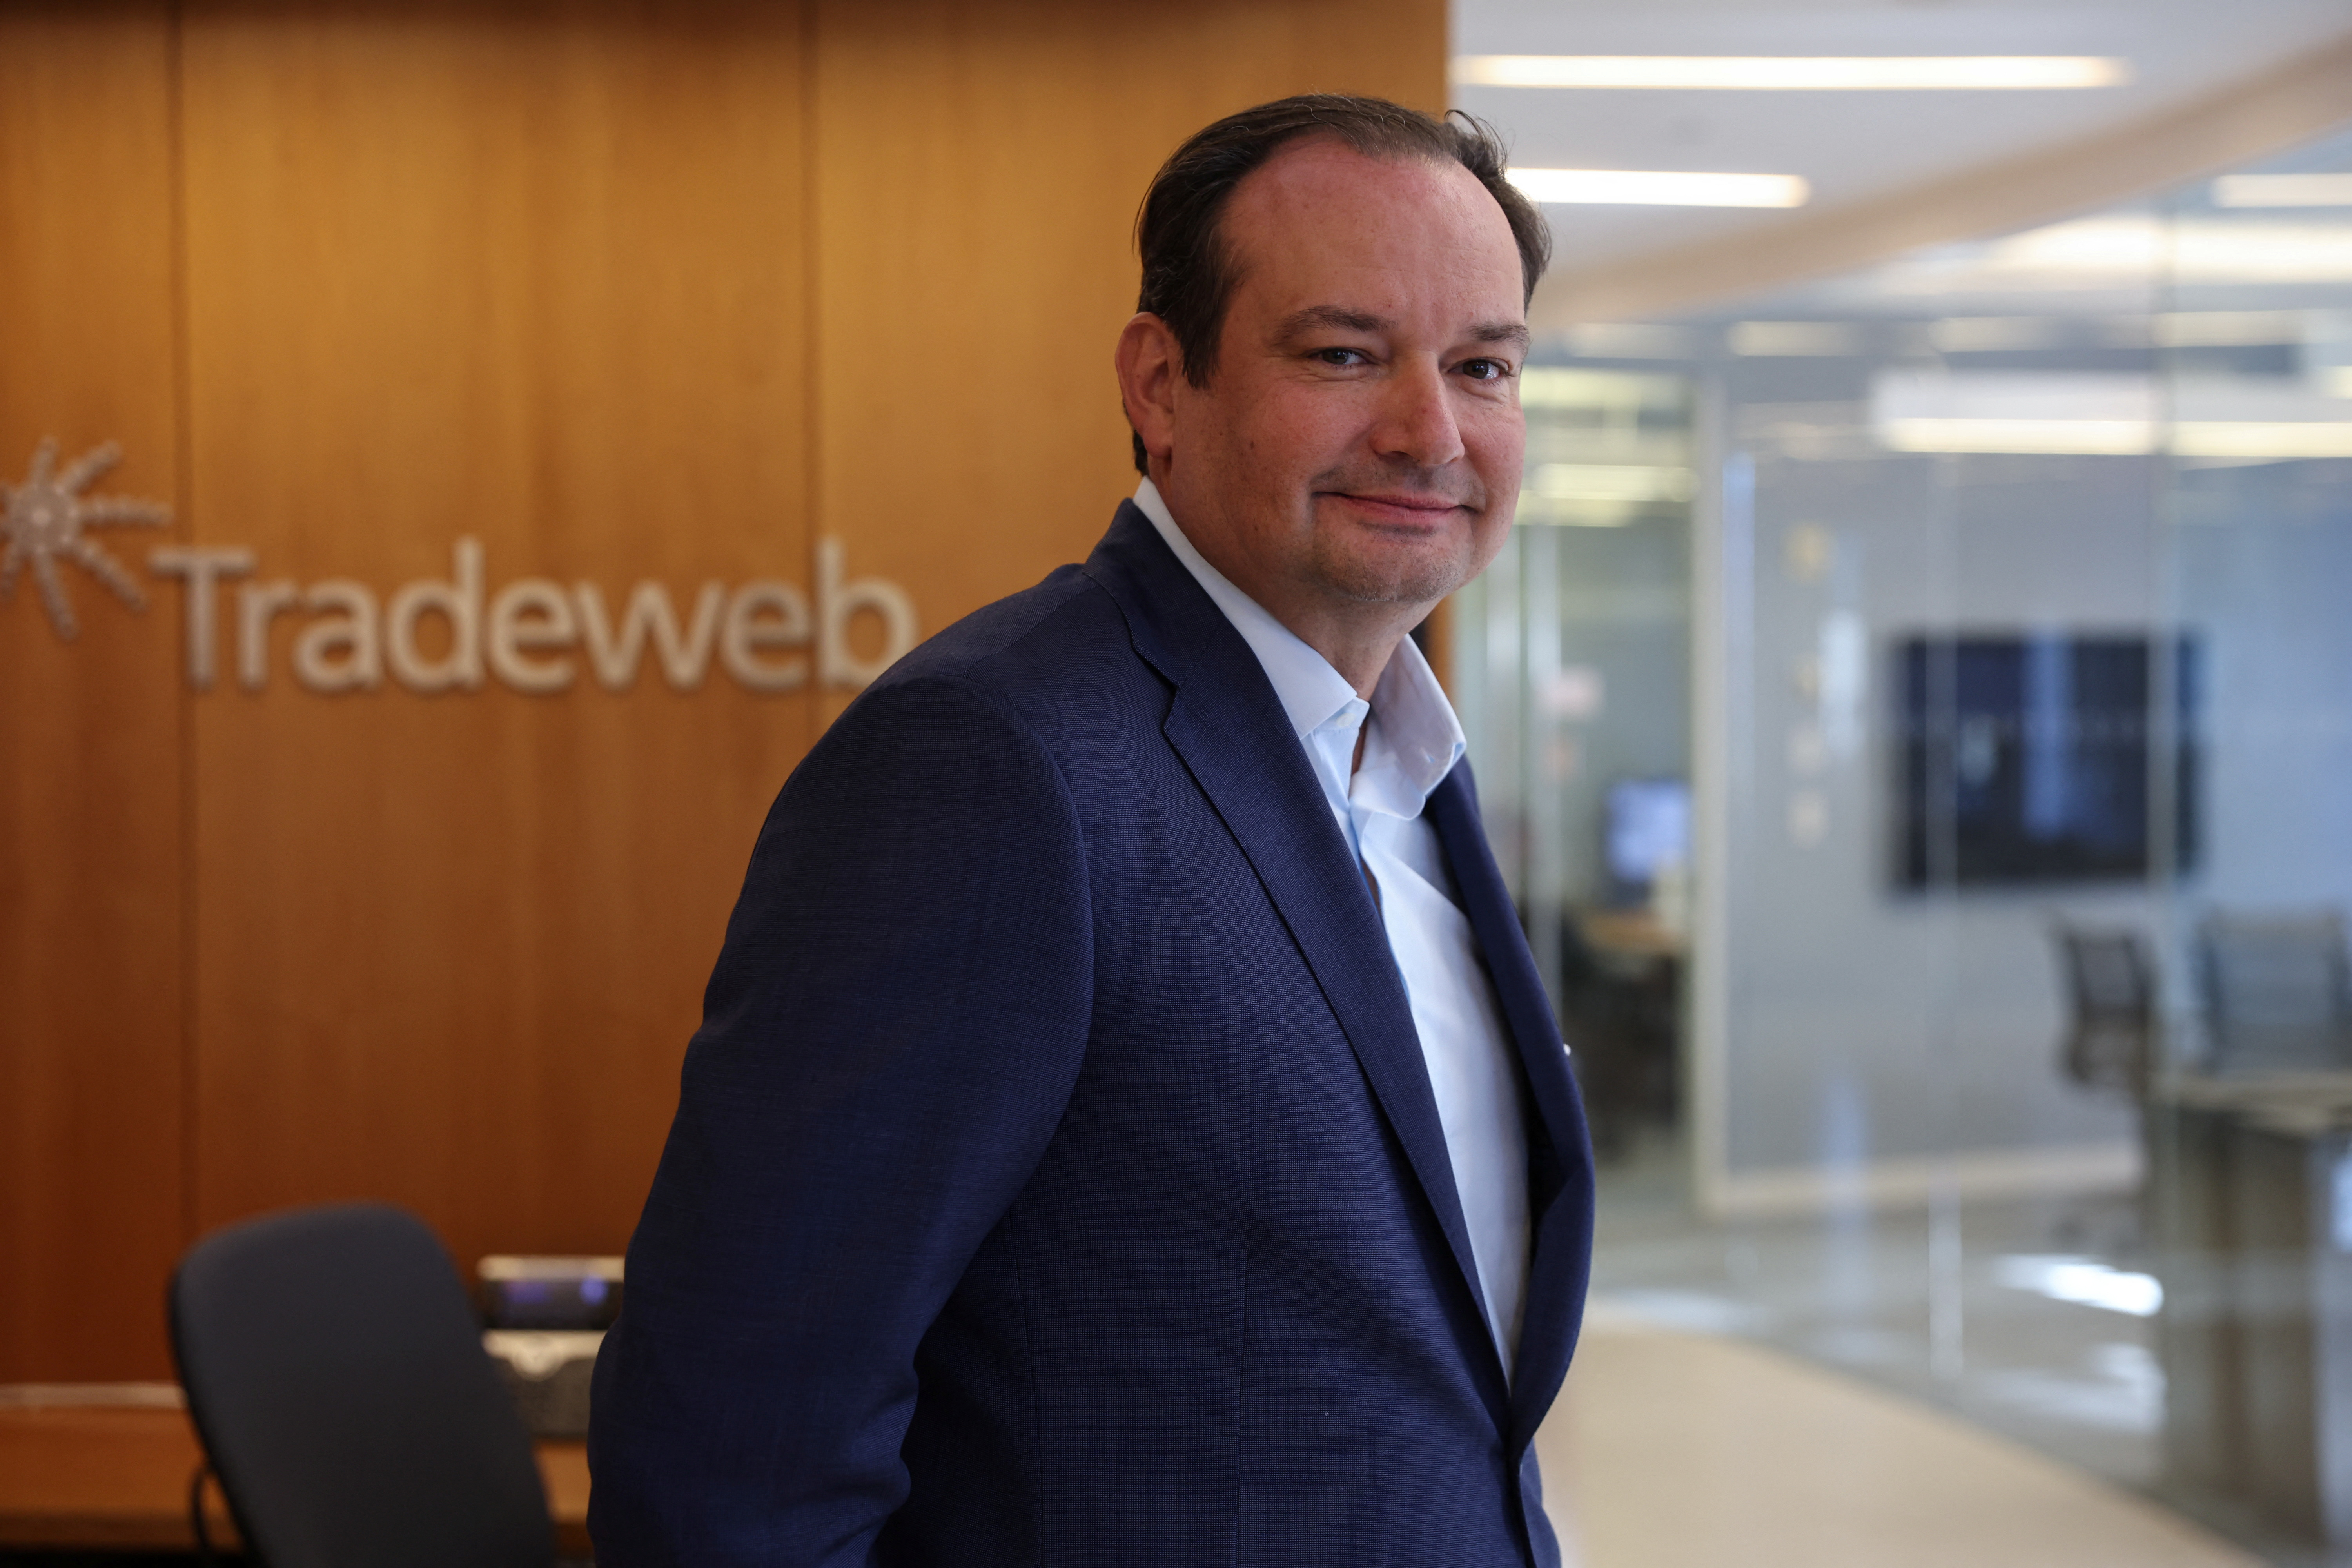 Billy Hult, CEO of Tradeweb Markets, poses for a portrait in New York City